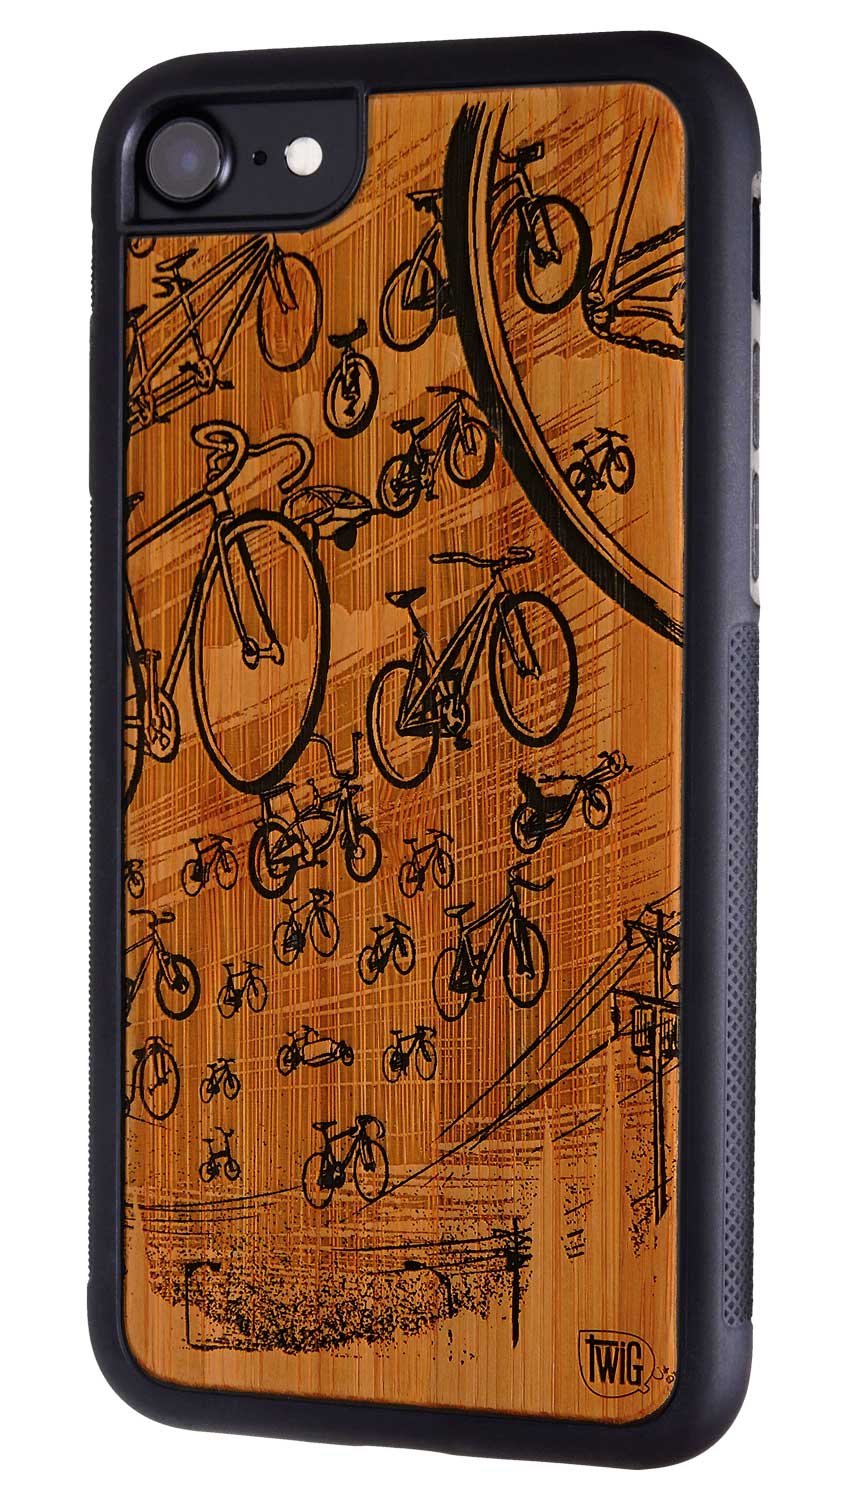 Frank in the Tempest: Pupshaw - Walnut iPhone Case, iPhone Case - Twig Case Co.